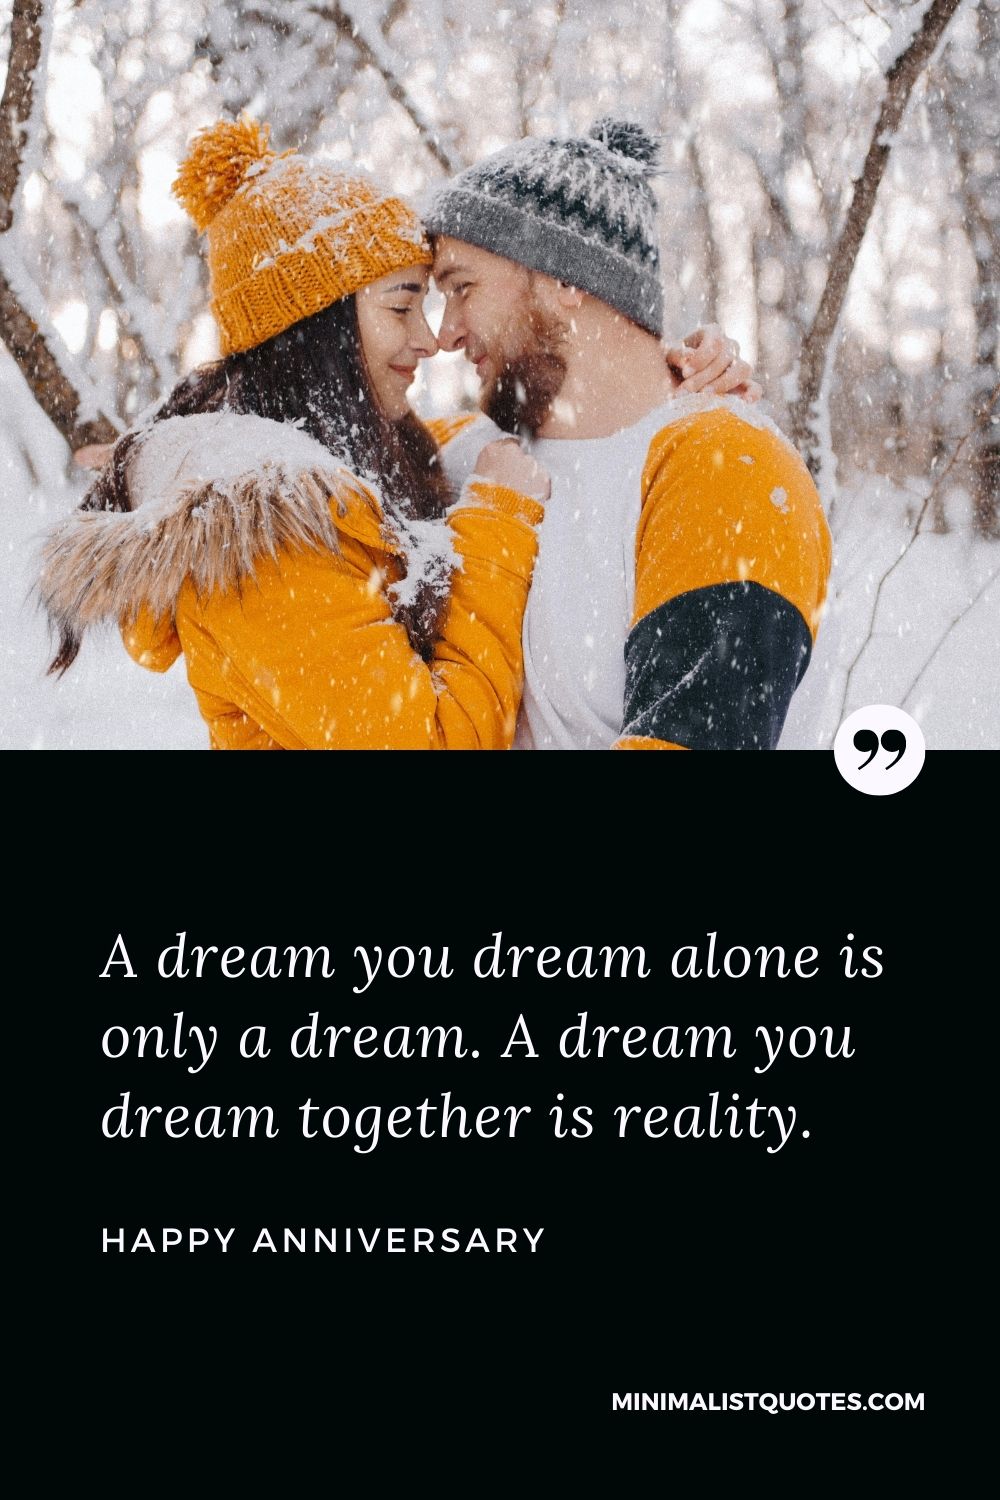 Anniversary Wish & Message With HD Image: A dream you dream alone is only a dream. A dream you dream together is reality. Happy Anniversary!